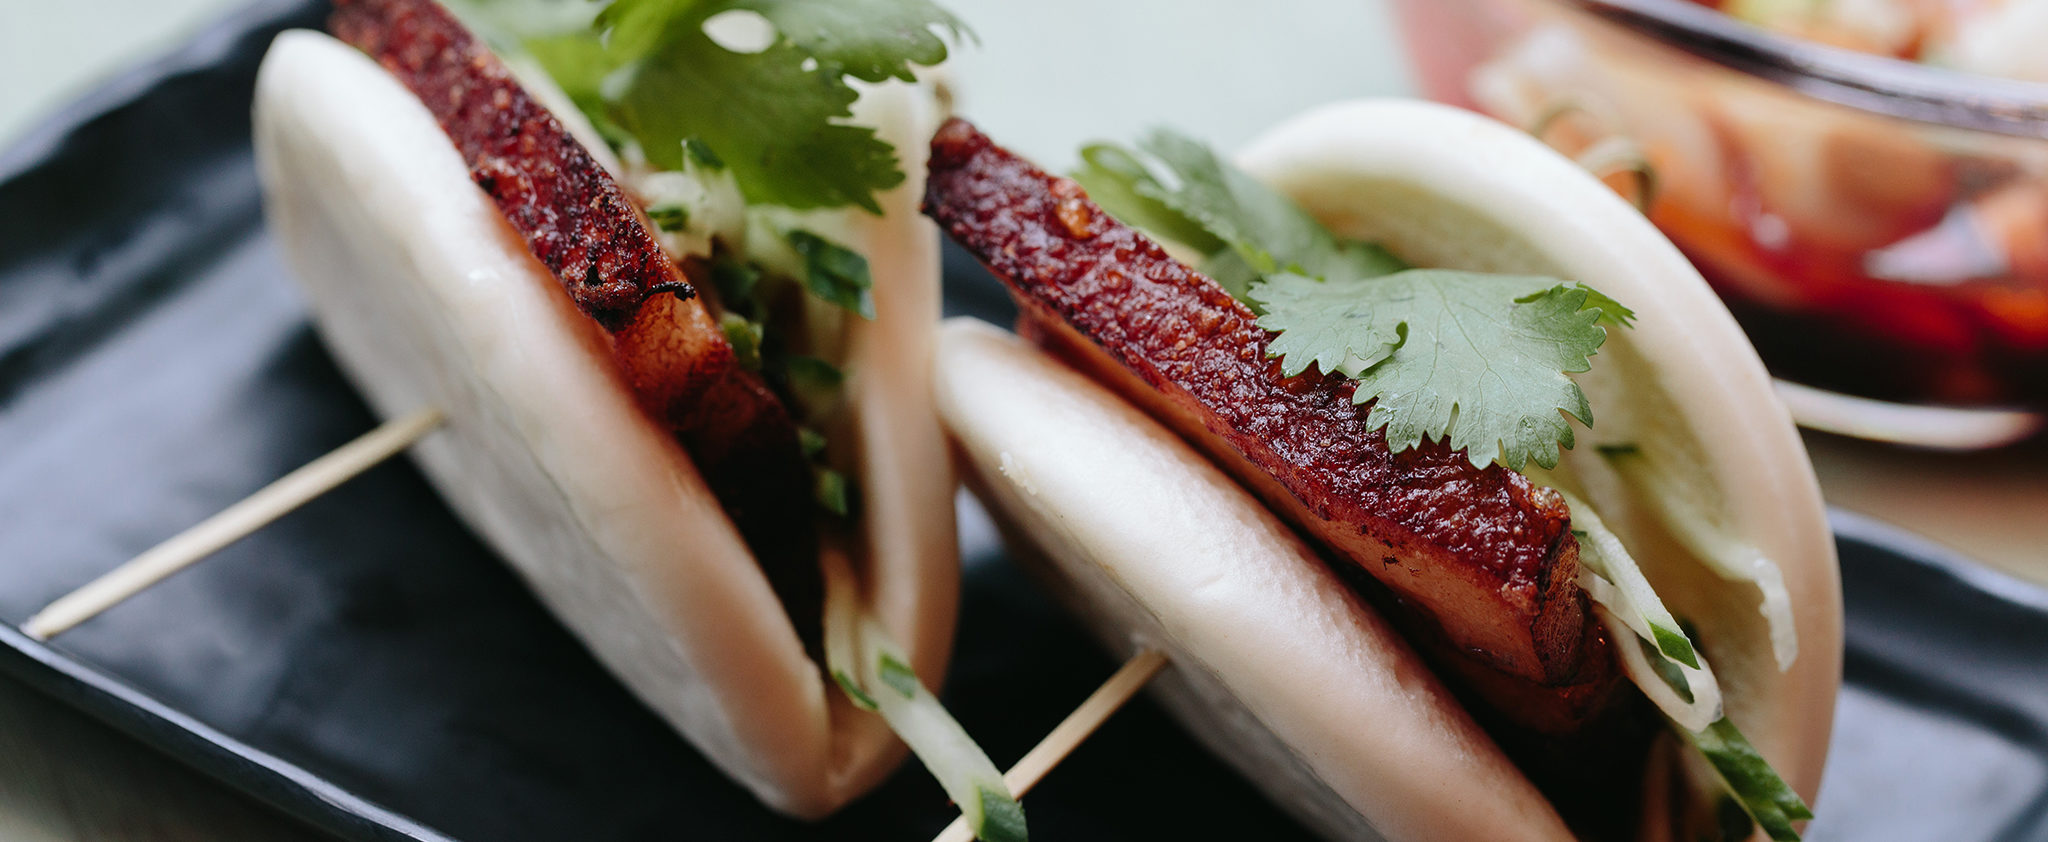 Pork belly buns from Bess's Cafe